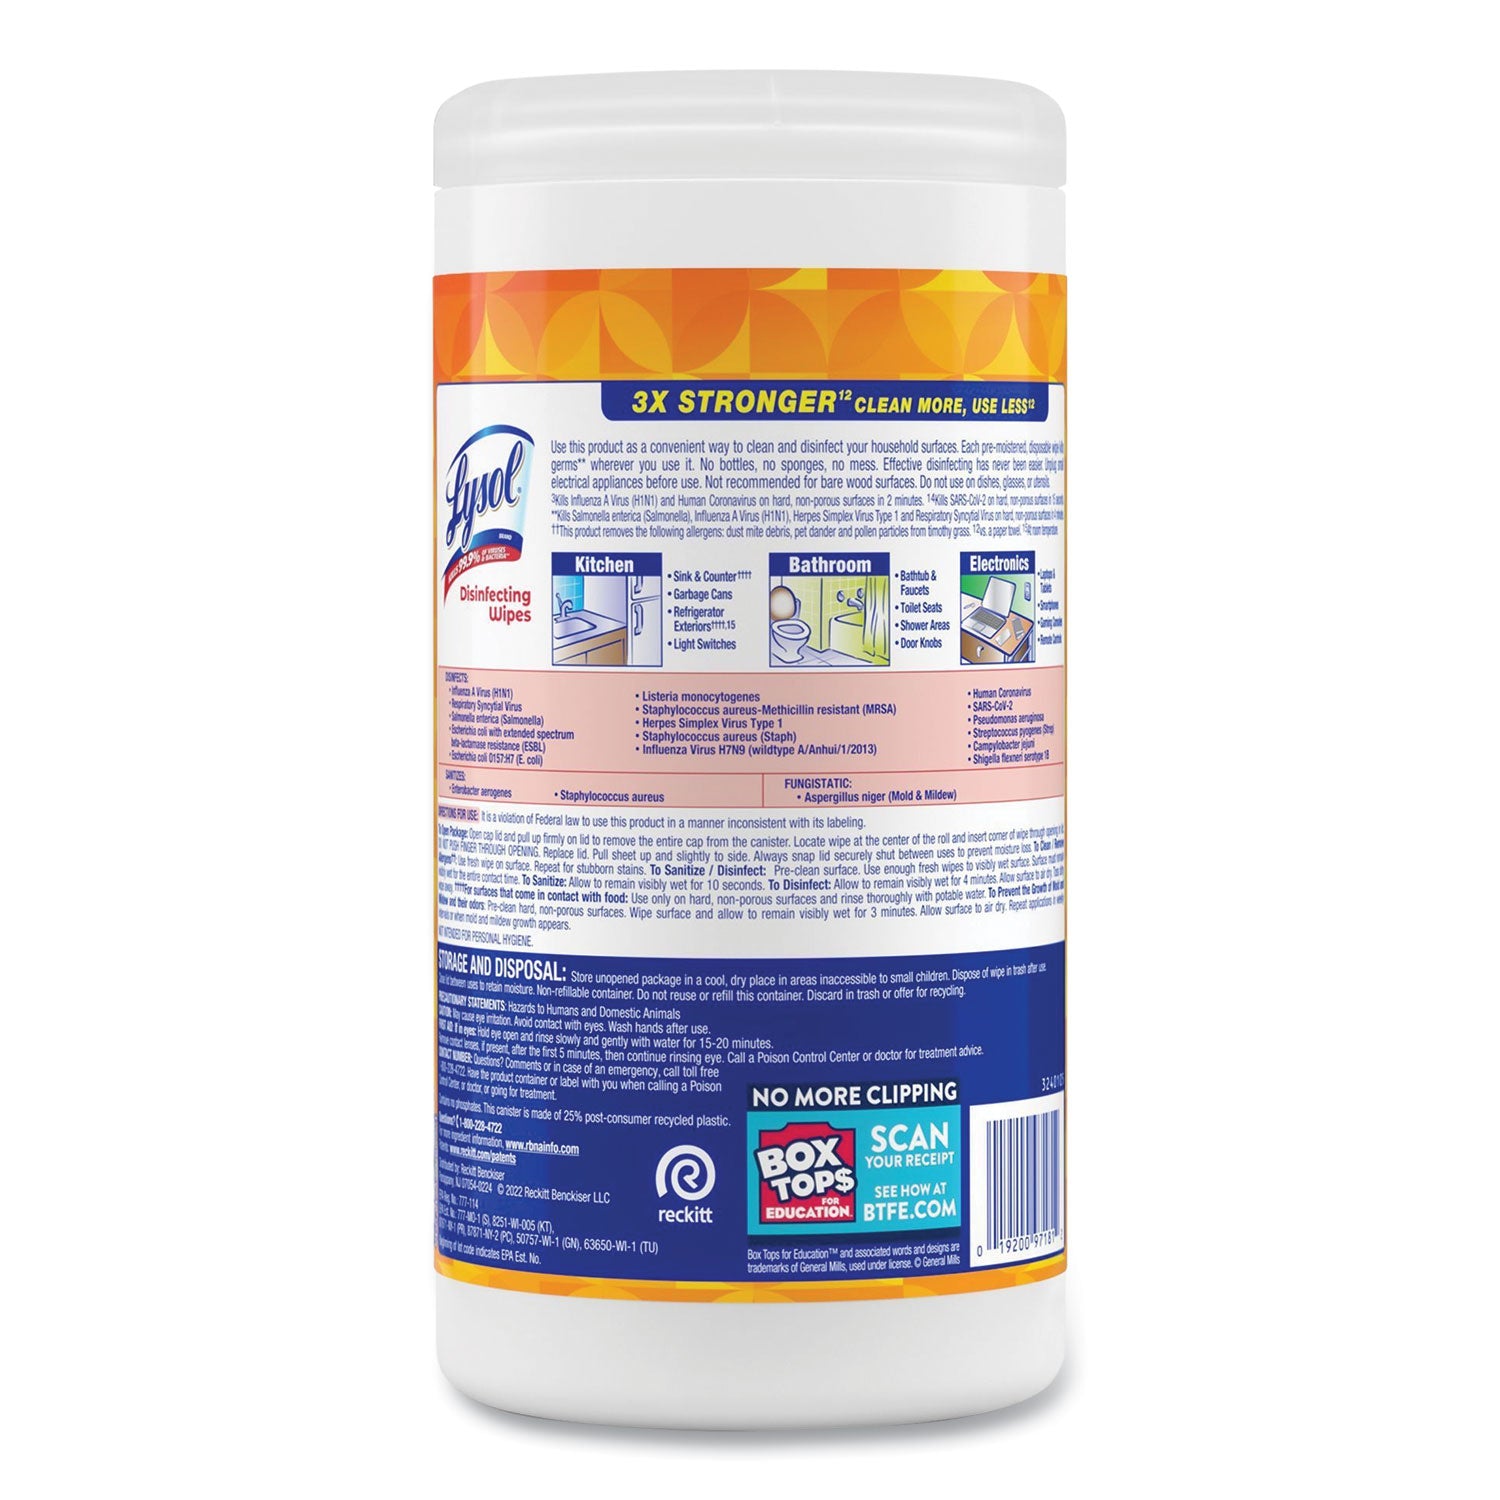 disinfecting-wipes-1-ply-7-x-725-mango-and-hibiscus-white-80-wipes-canister-6-canisters-carton_rac97181 - 4